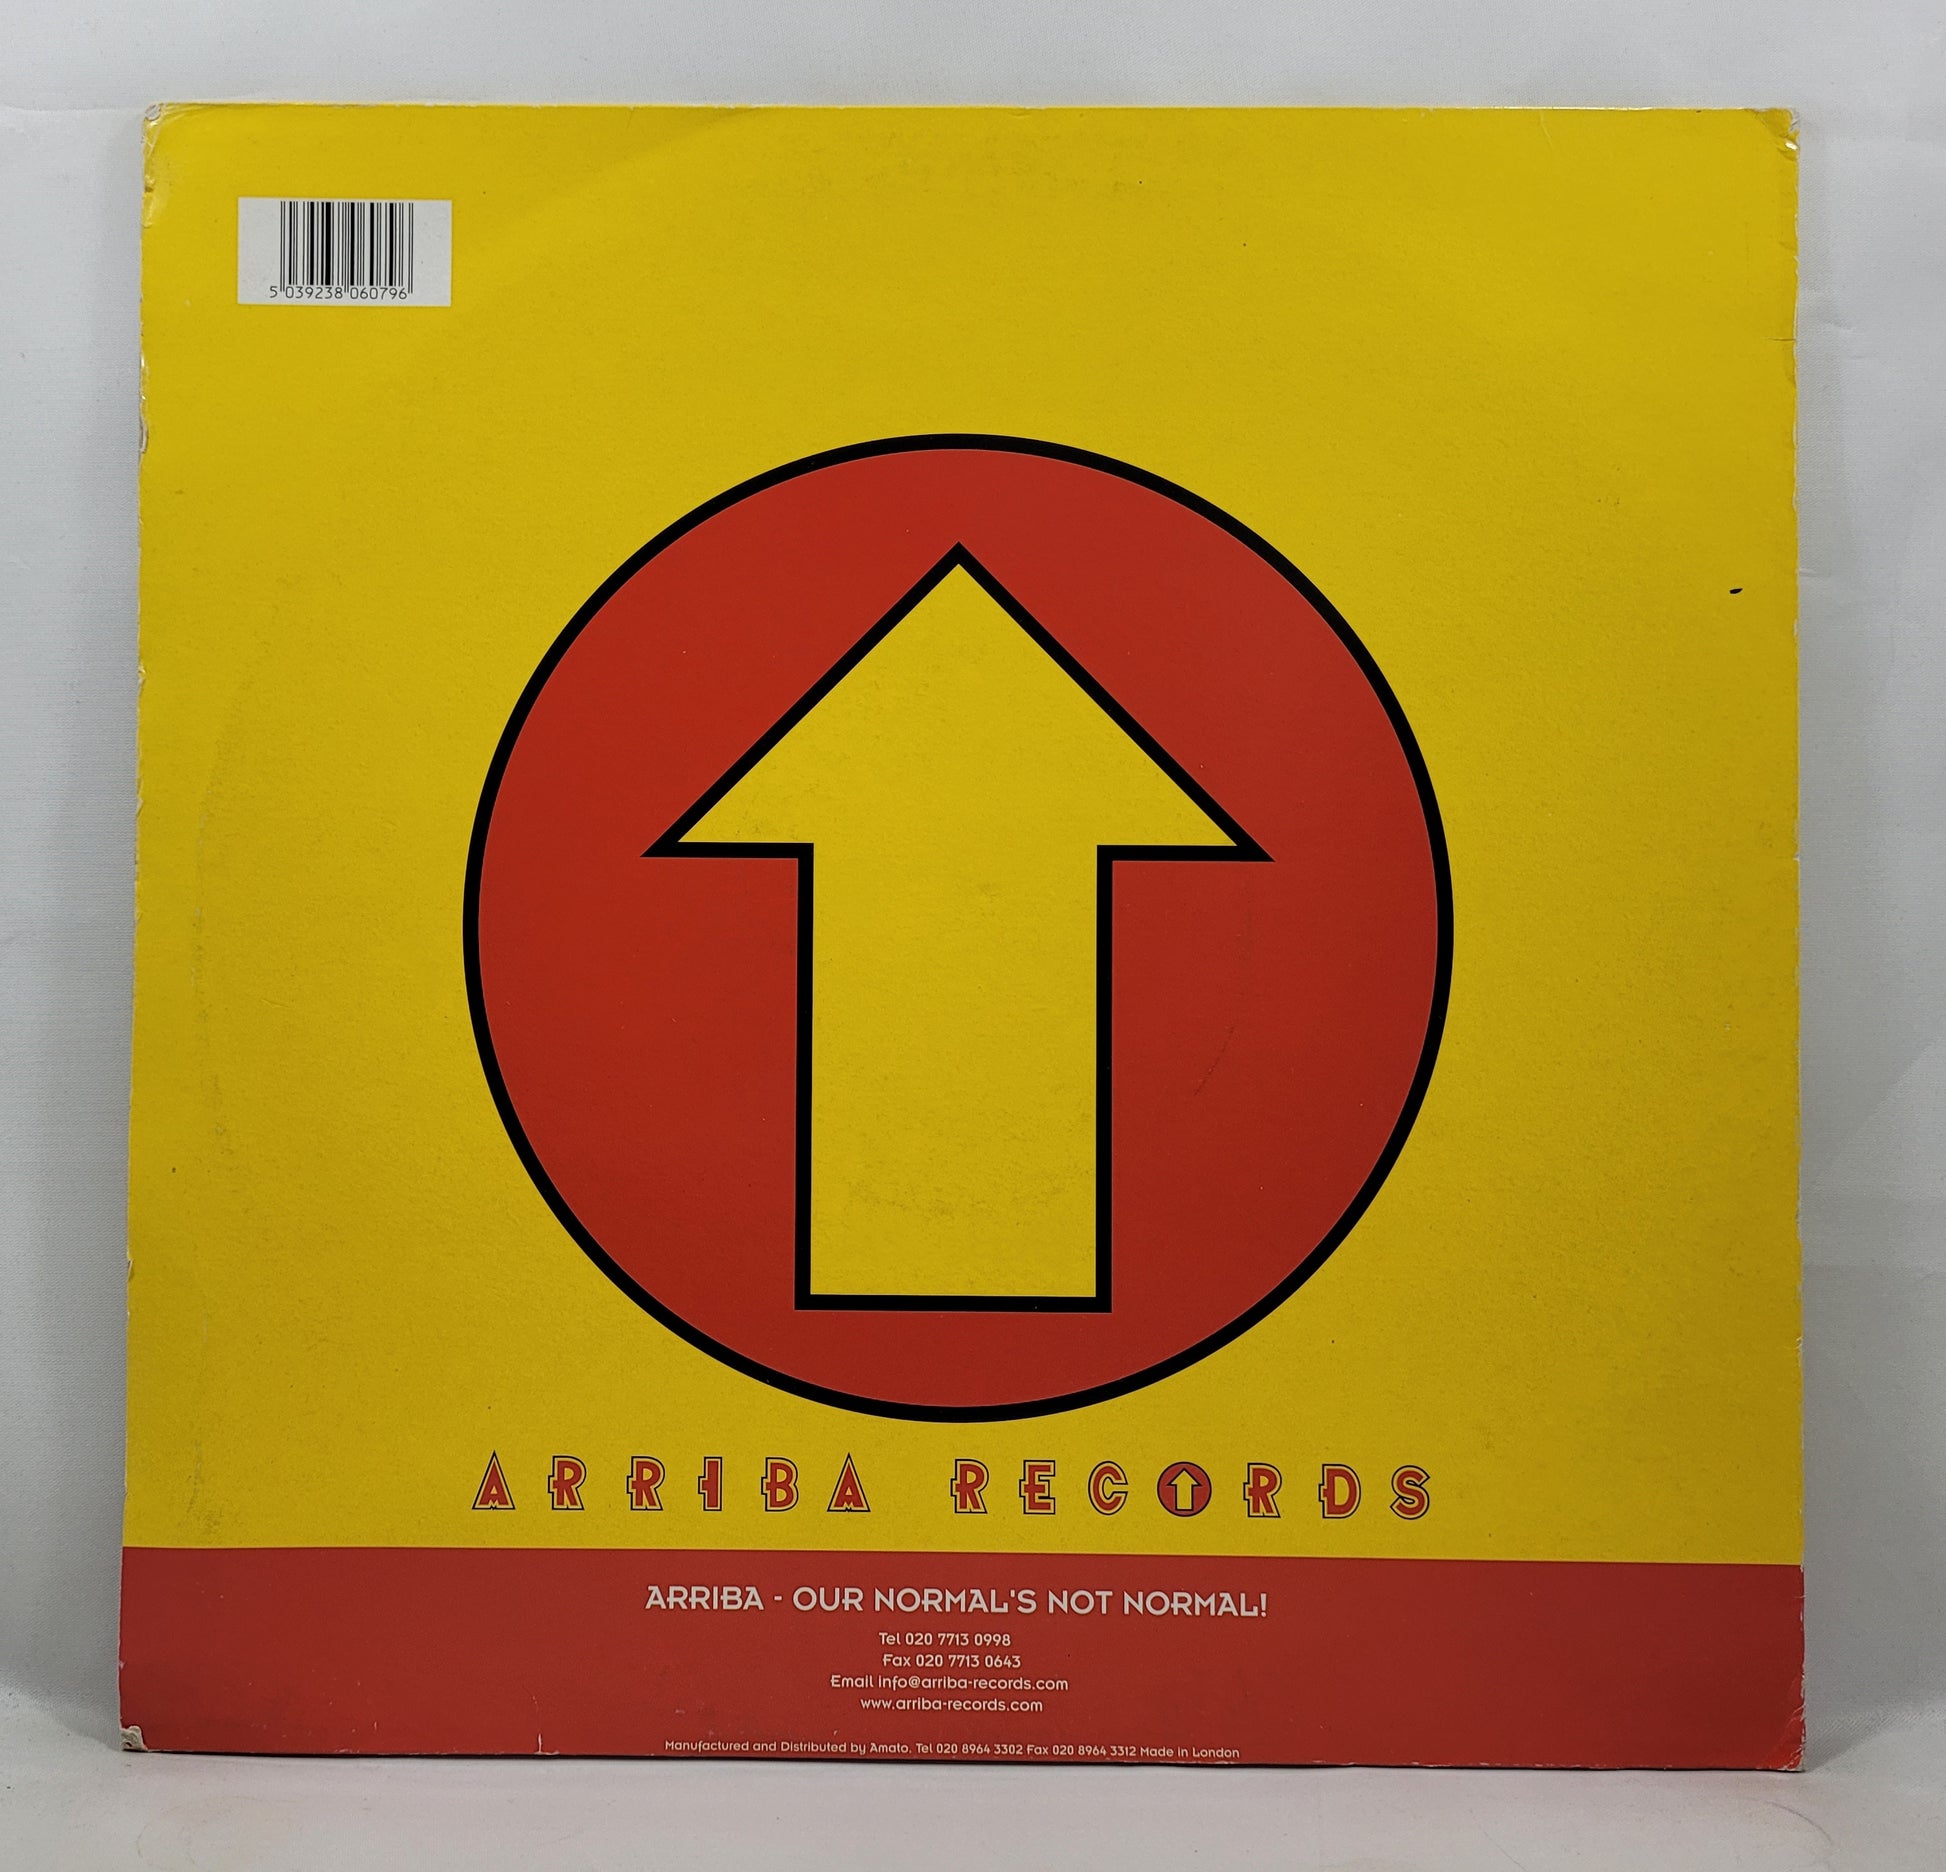 Arriba Sound System - I Got Chucked Out! [2000 Used Vinyl Record 12" Single]